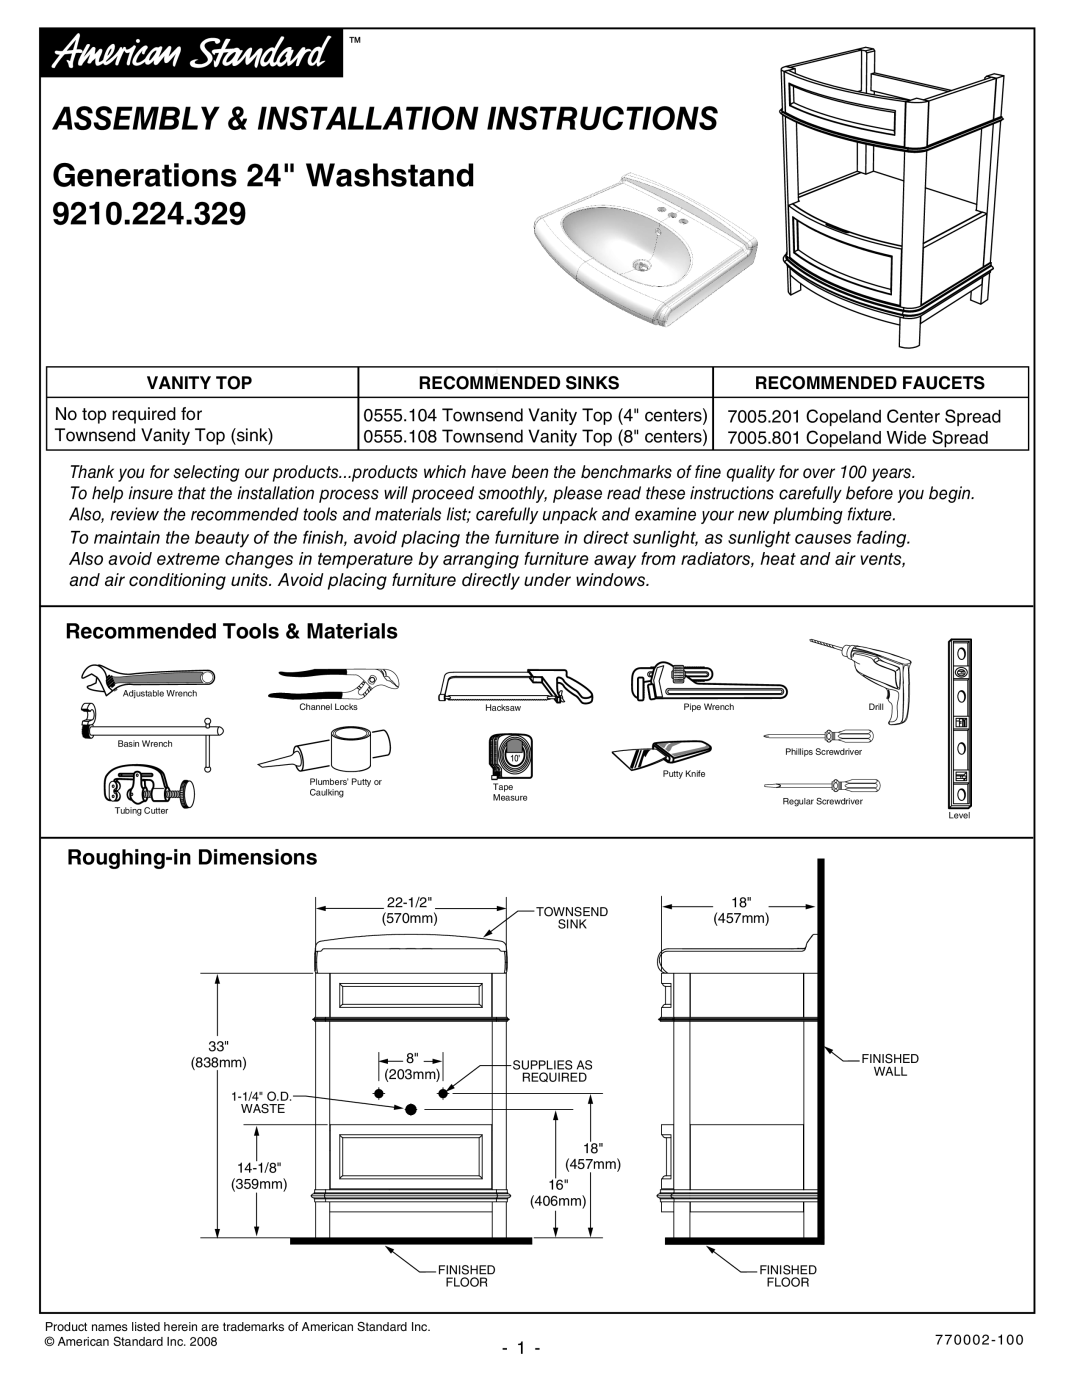 American Standard 9210.224.329 installation instructions Generations 24 Washstand, Recommended Tools & Materials 